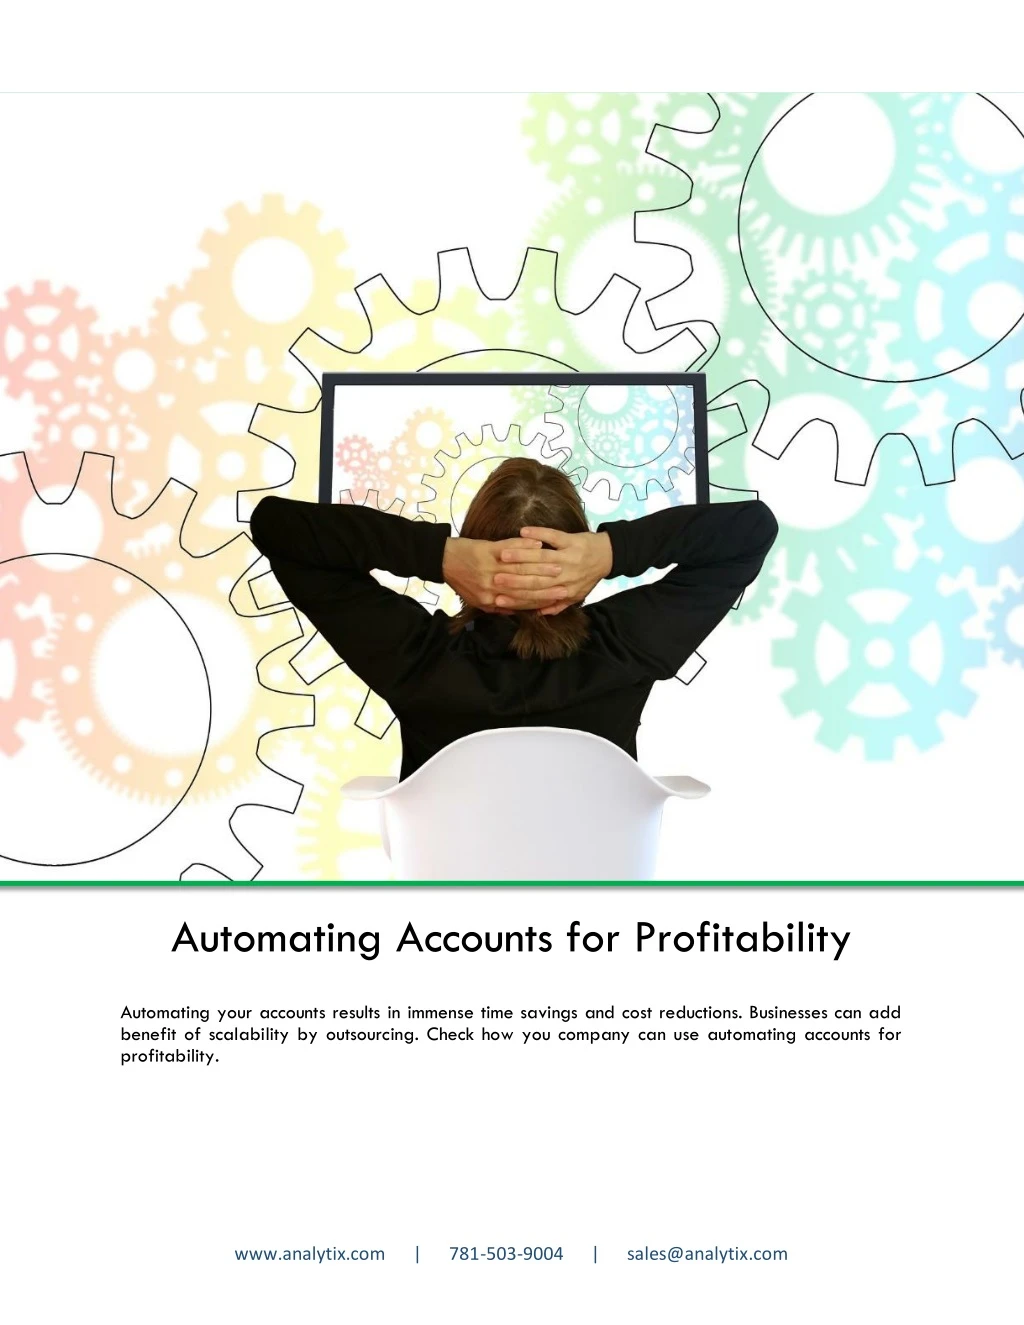 automating accounts for profitability